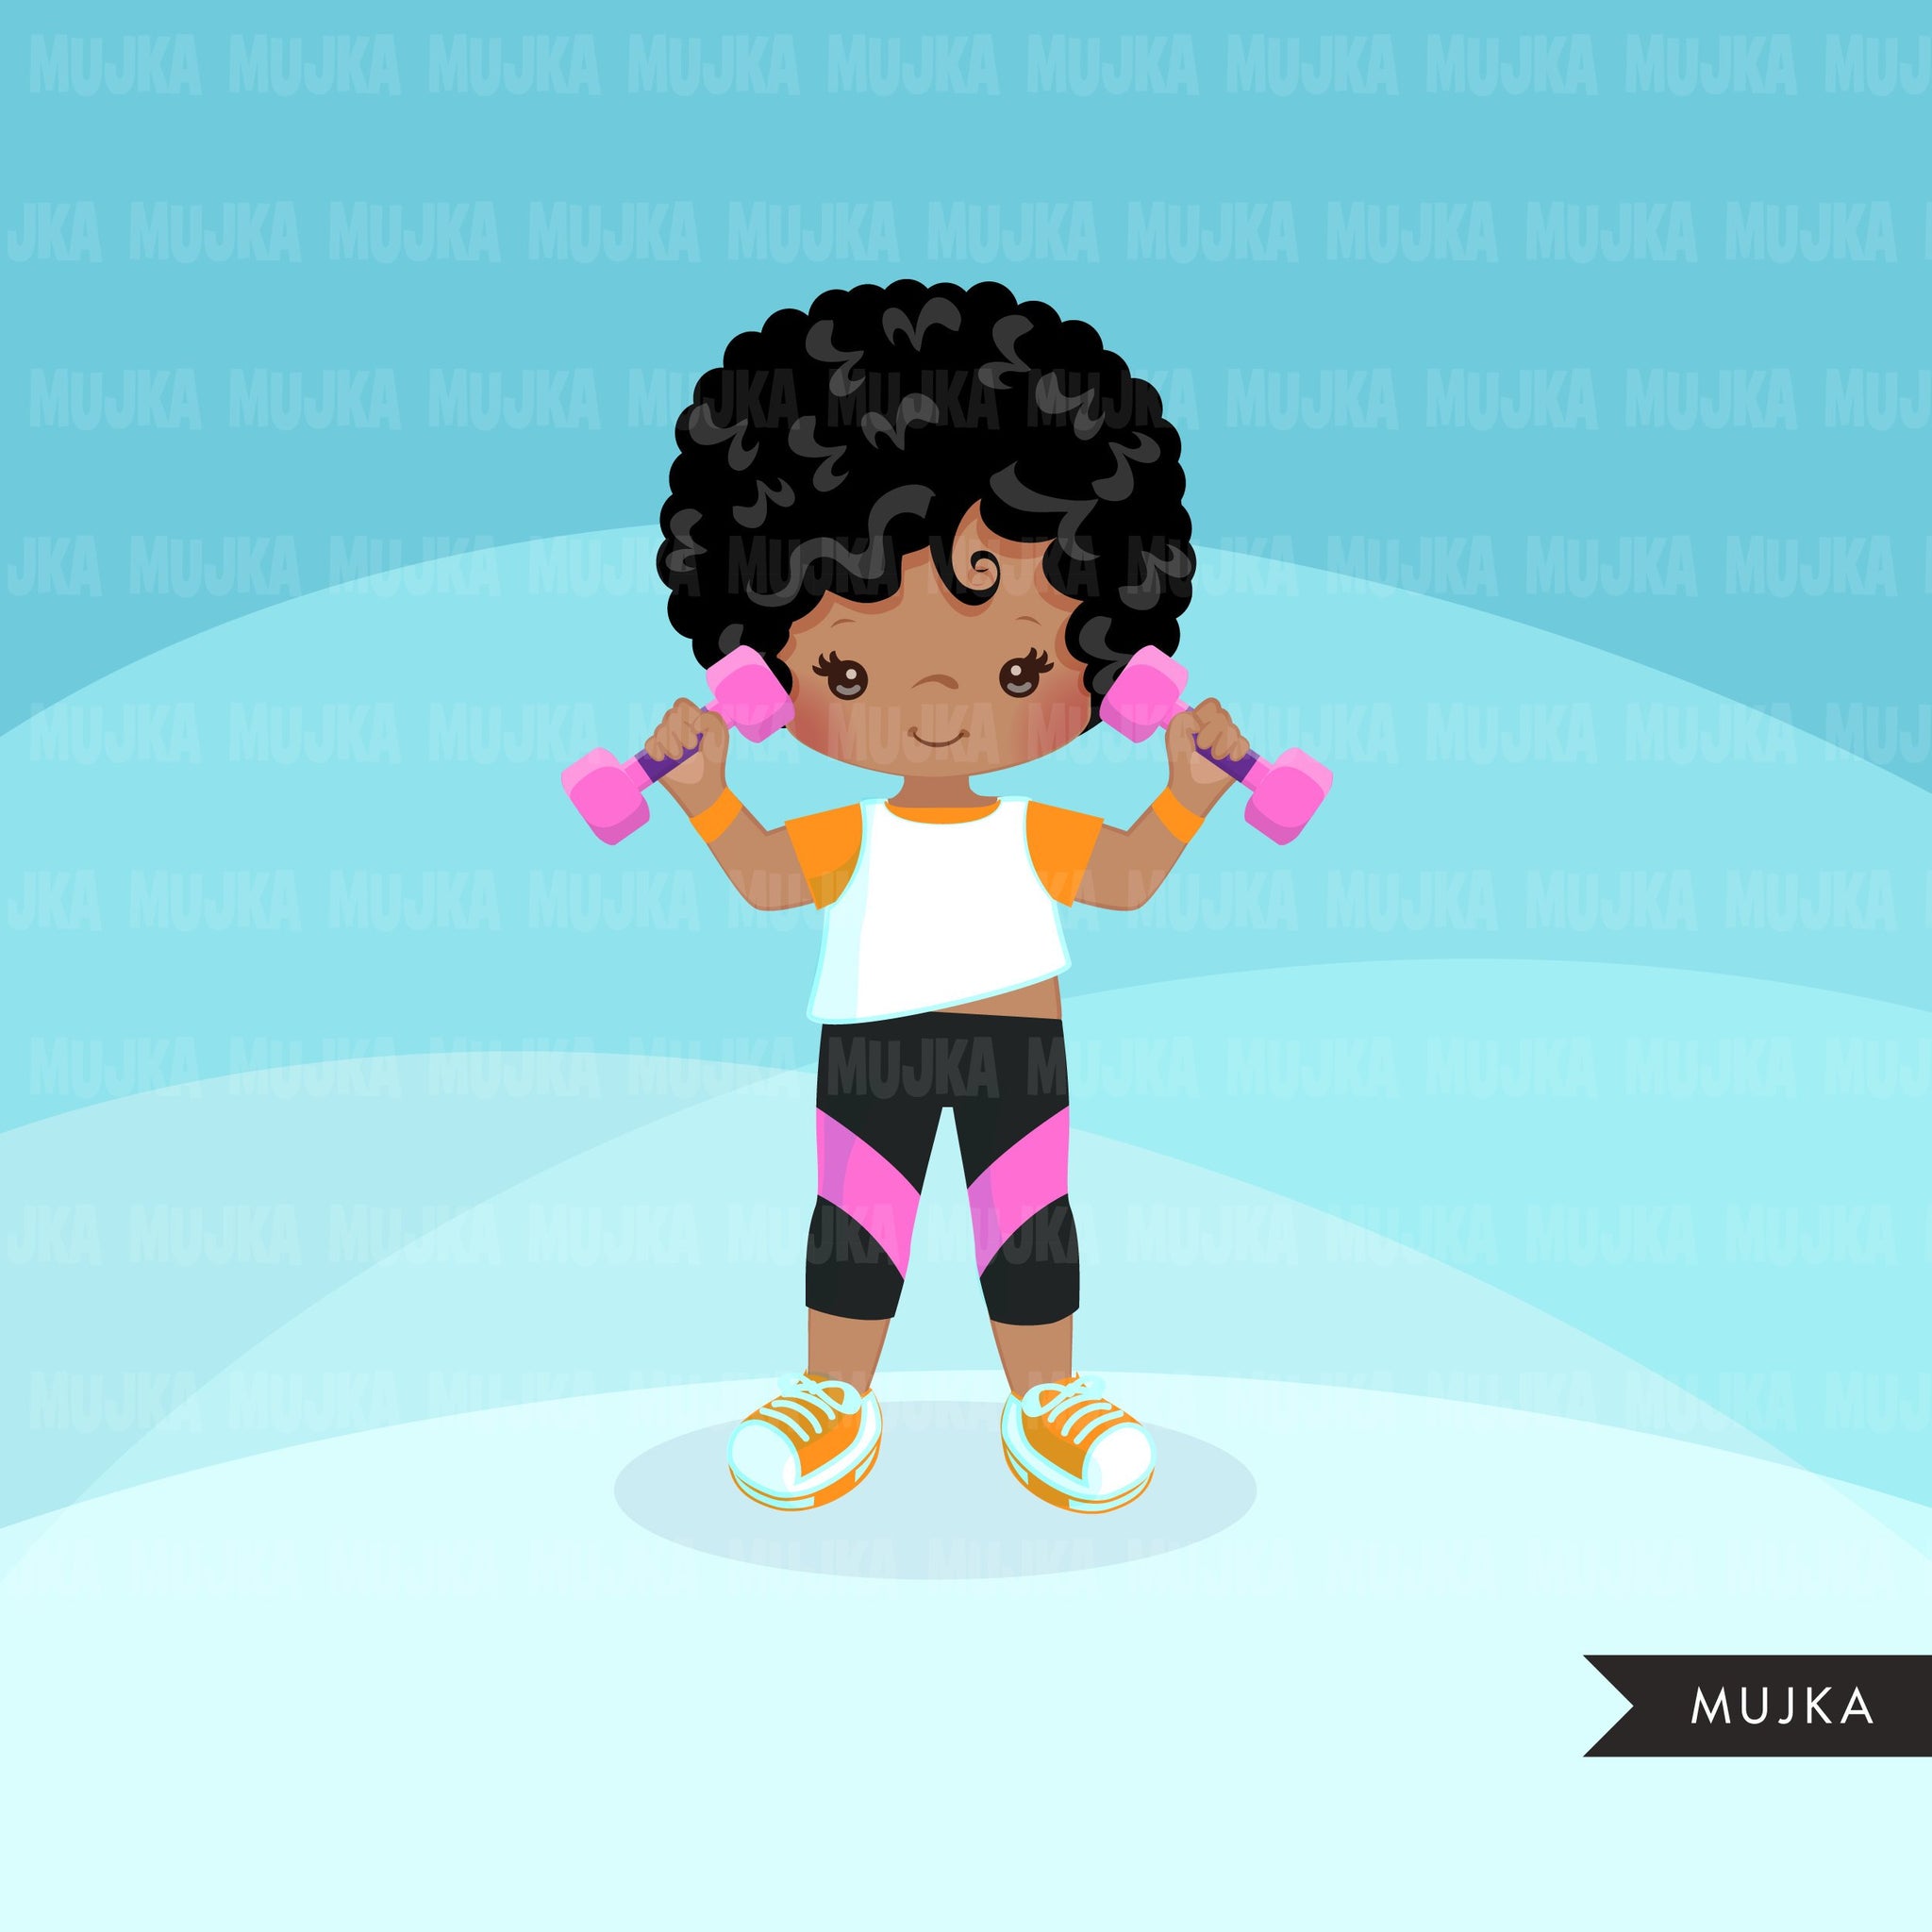 Fitness clipart Healthy lifestyle, yoga, workout, gym graphics, commercial use clip art, weight lifting black girls